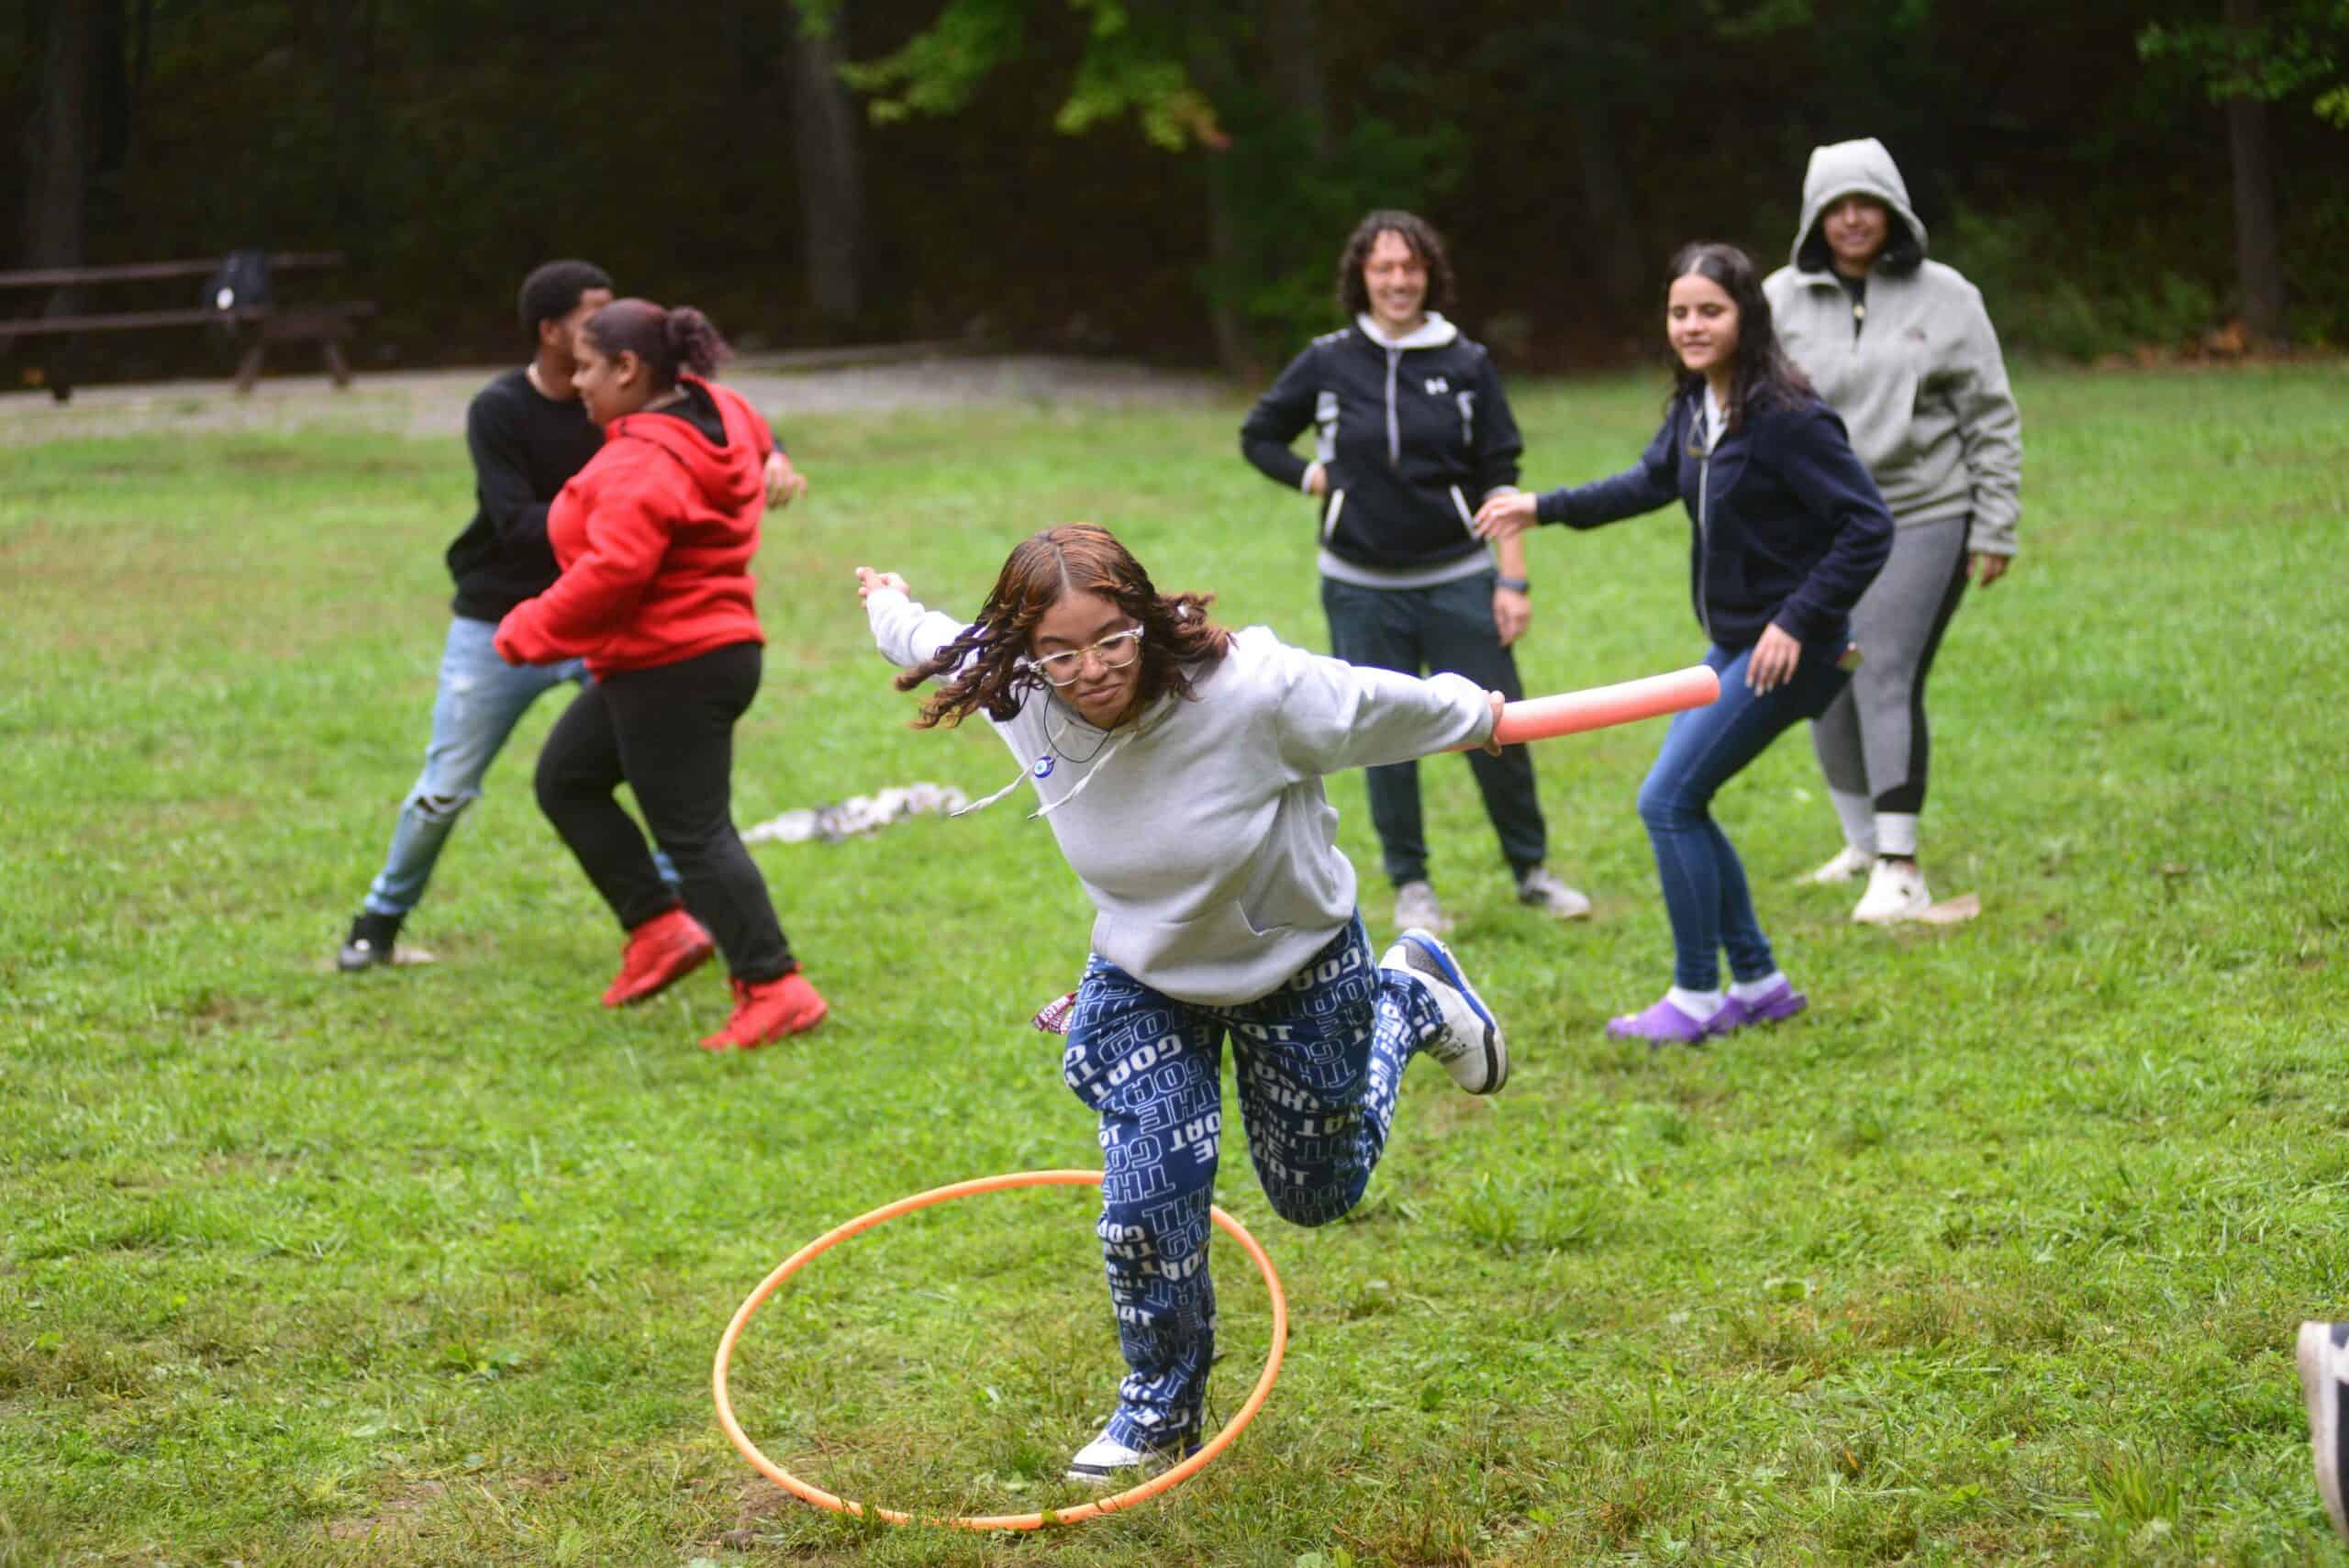 High school students from Boston complete an activity in a field.